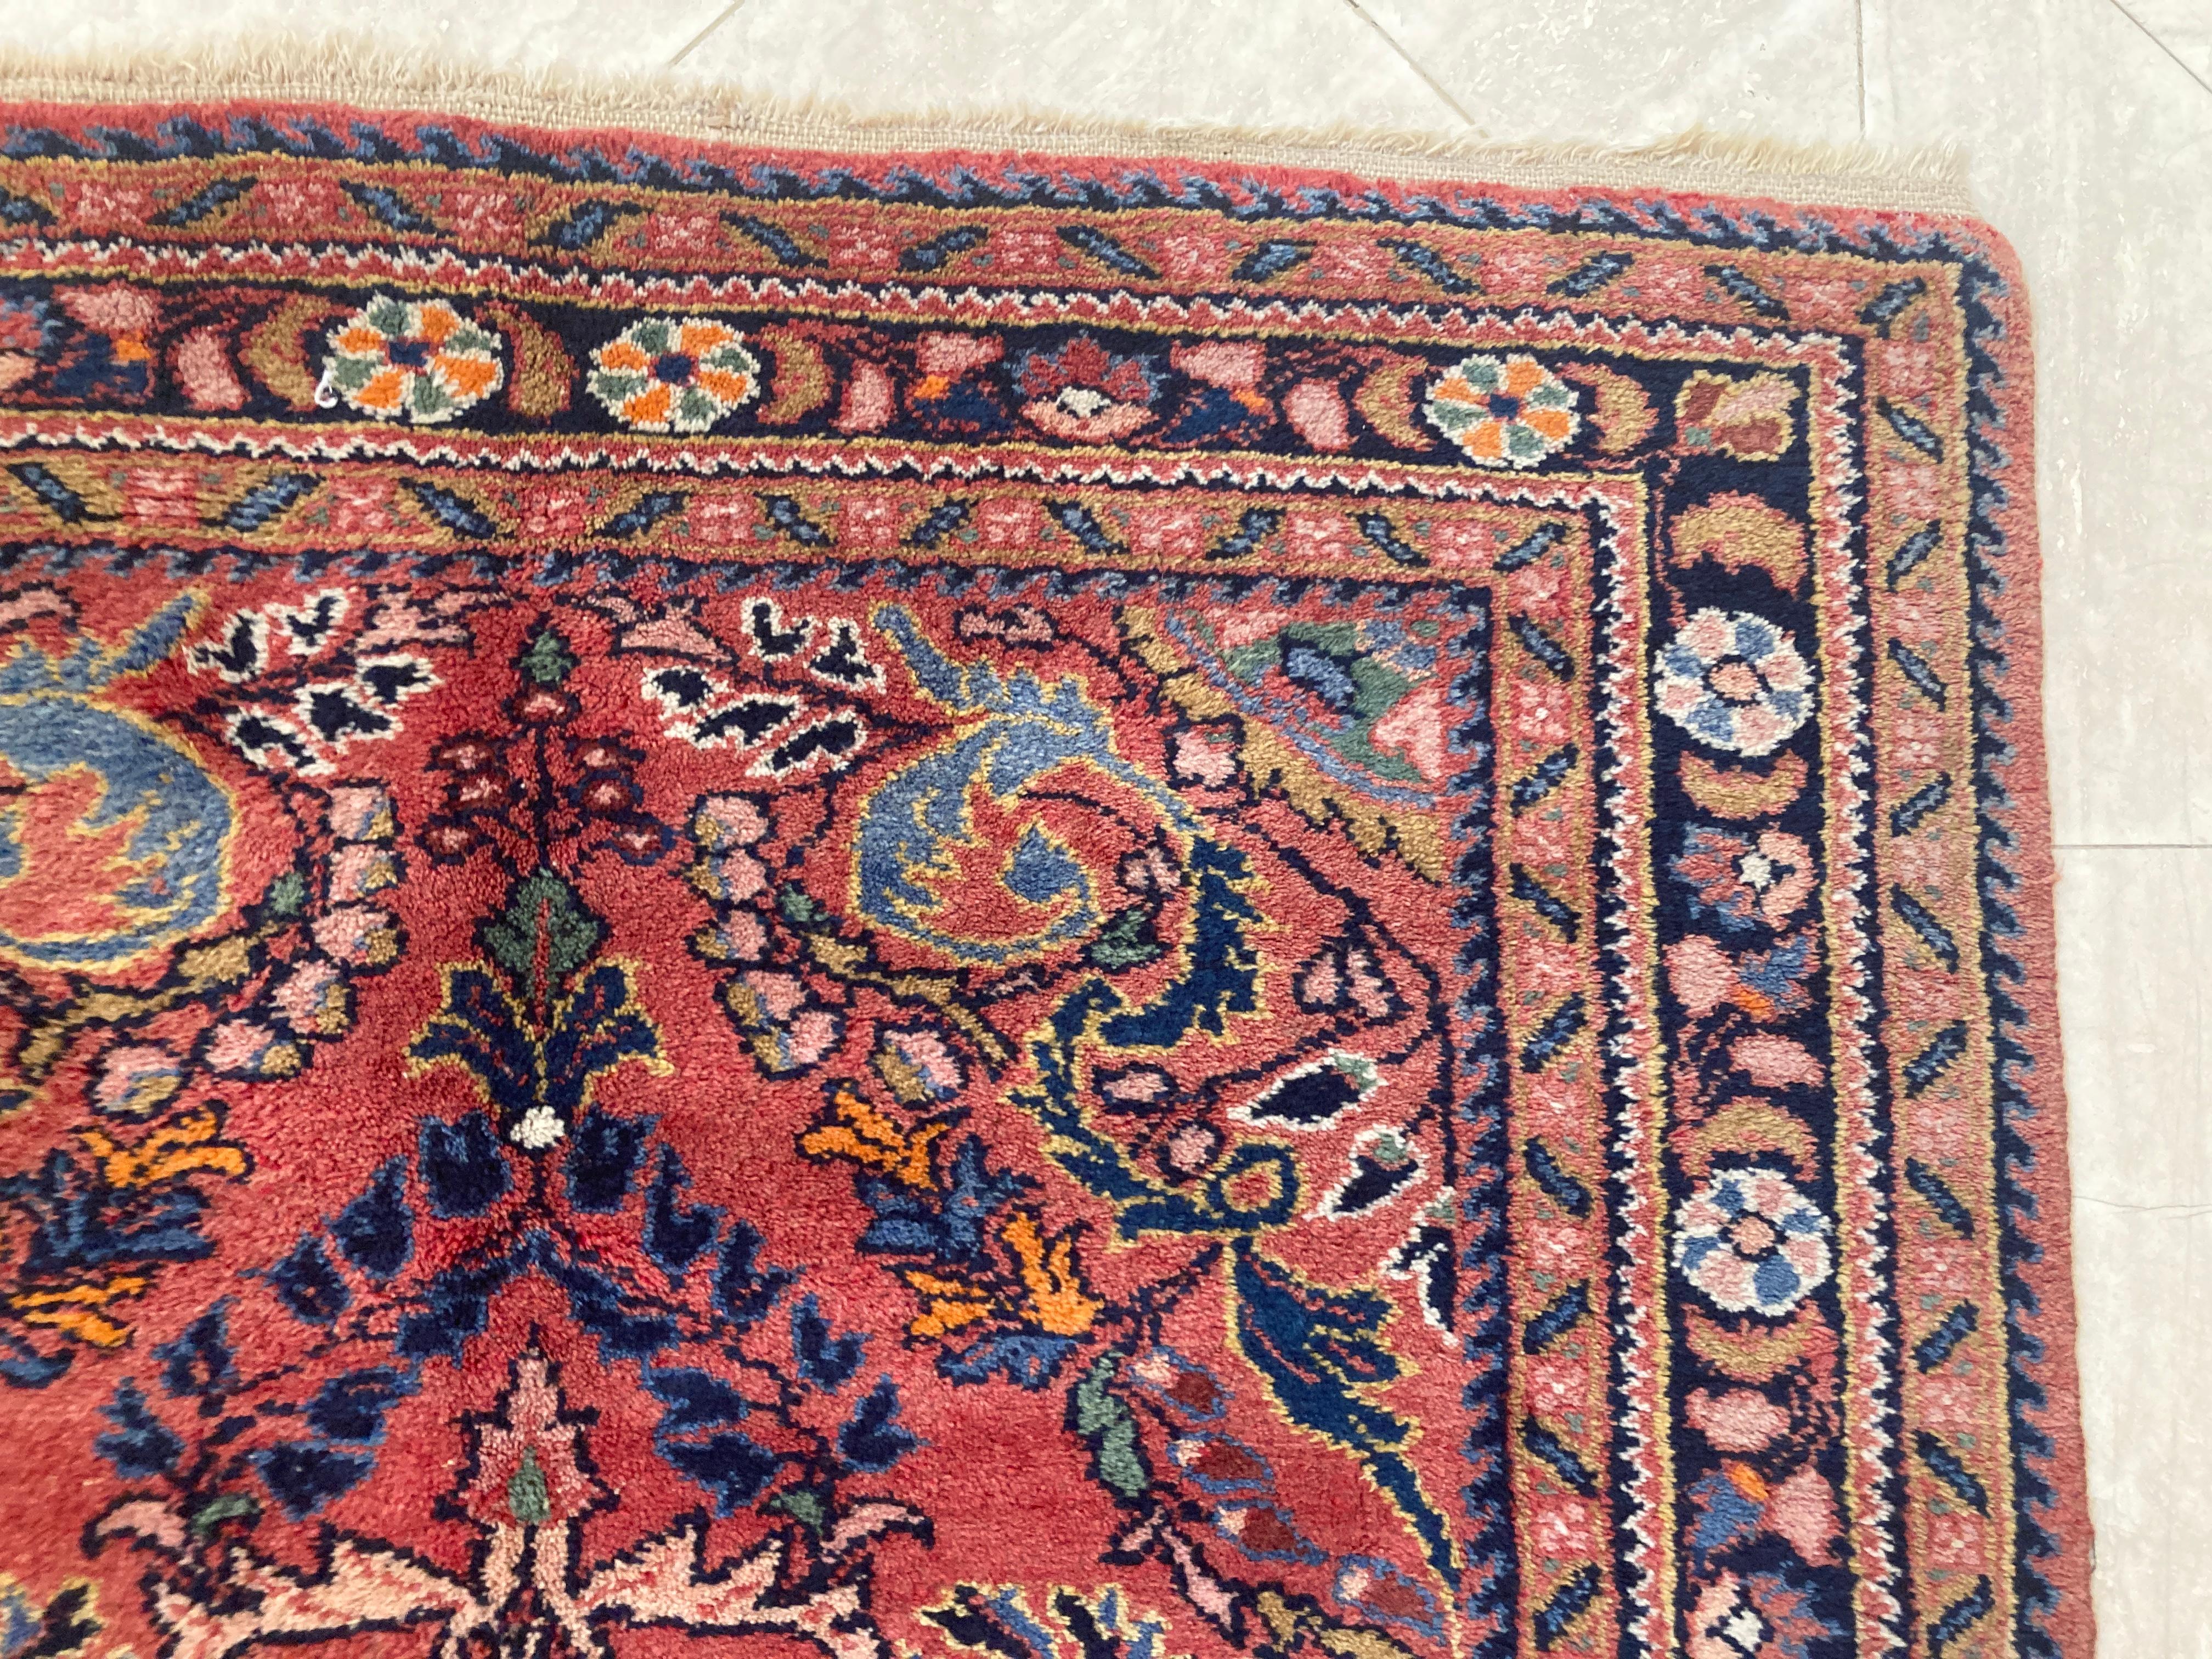 Antique Turkish Hand-Knotted Ethnic Rug, 1940 For Sale 3